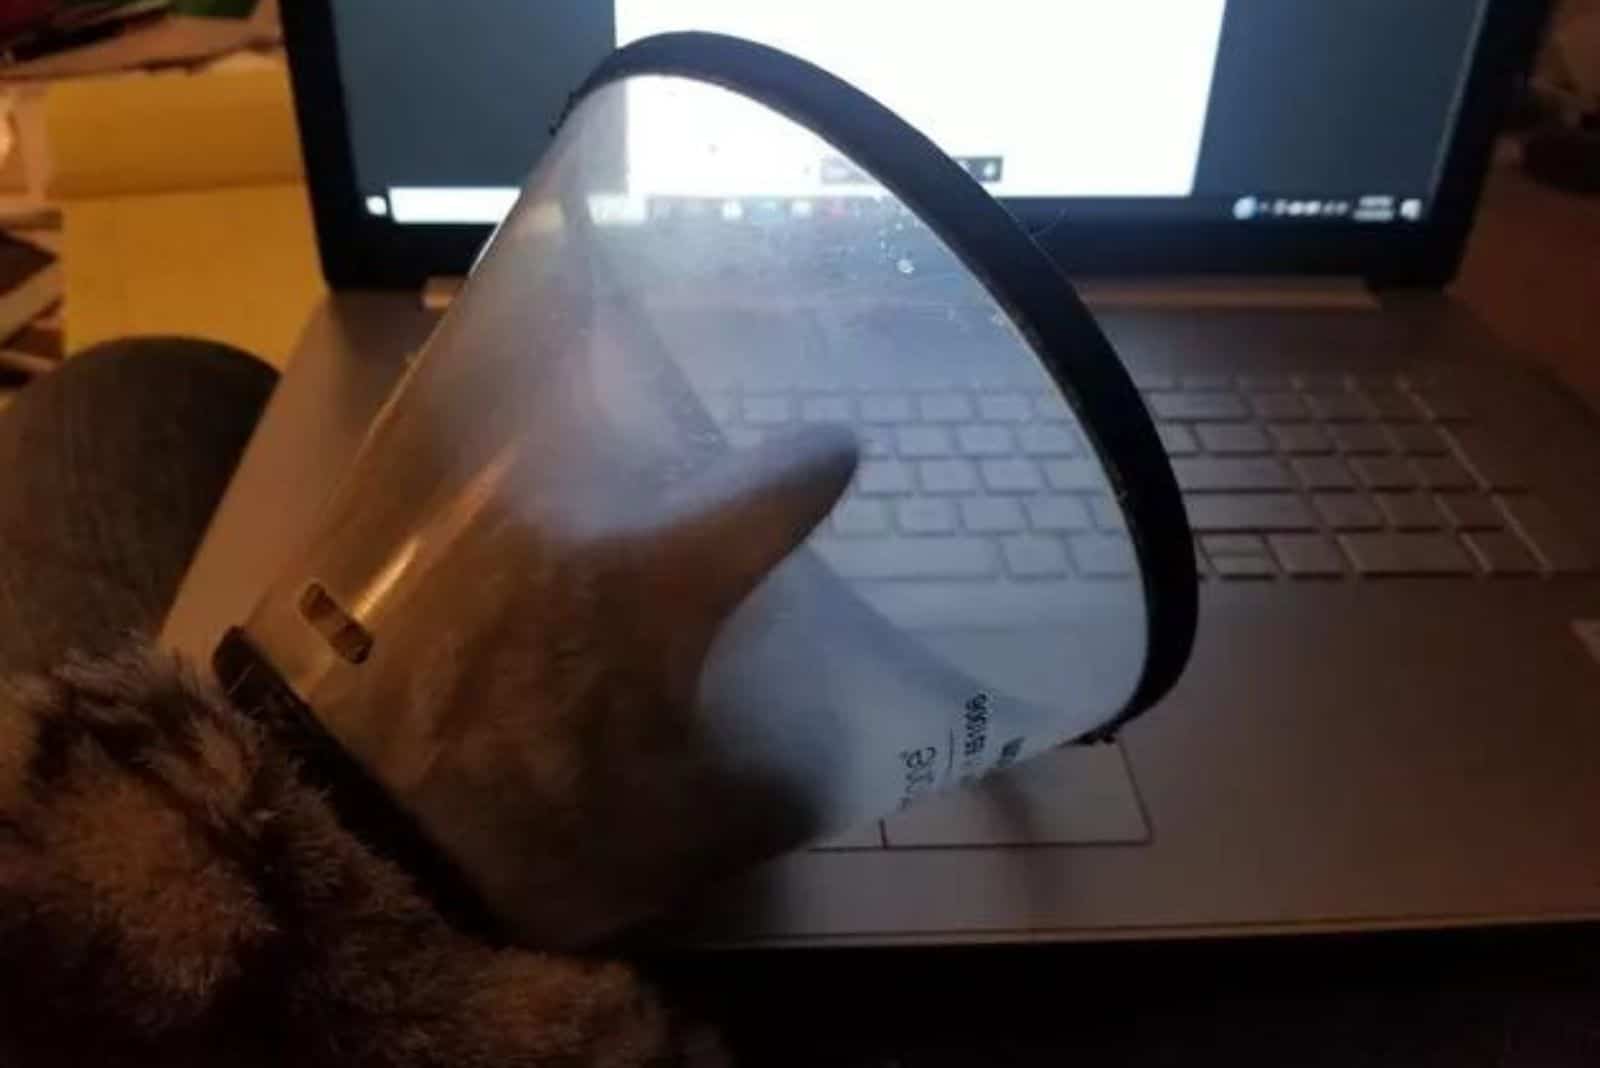 funny photo of a cat wearing a cone and looking at a laptop